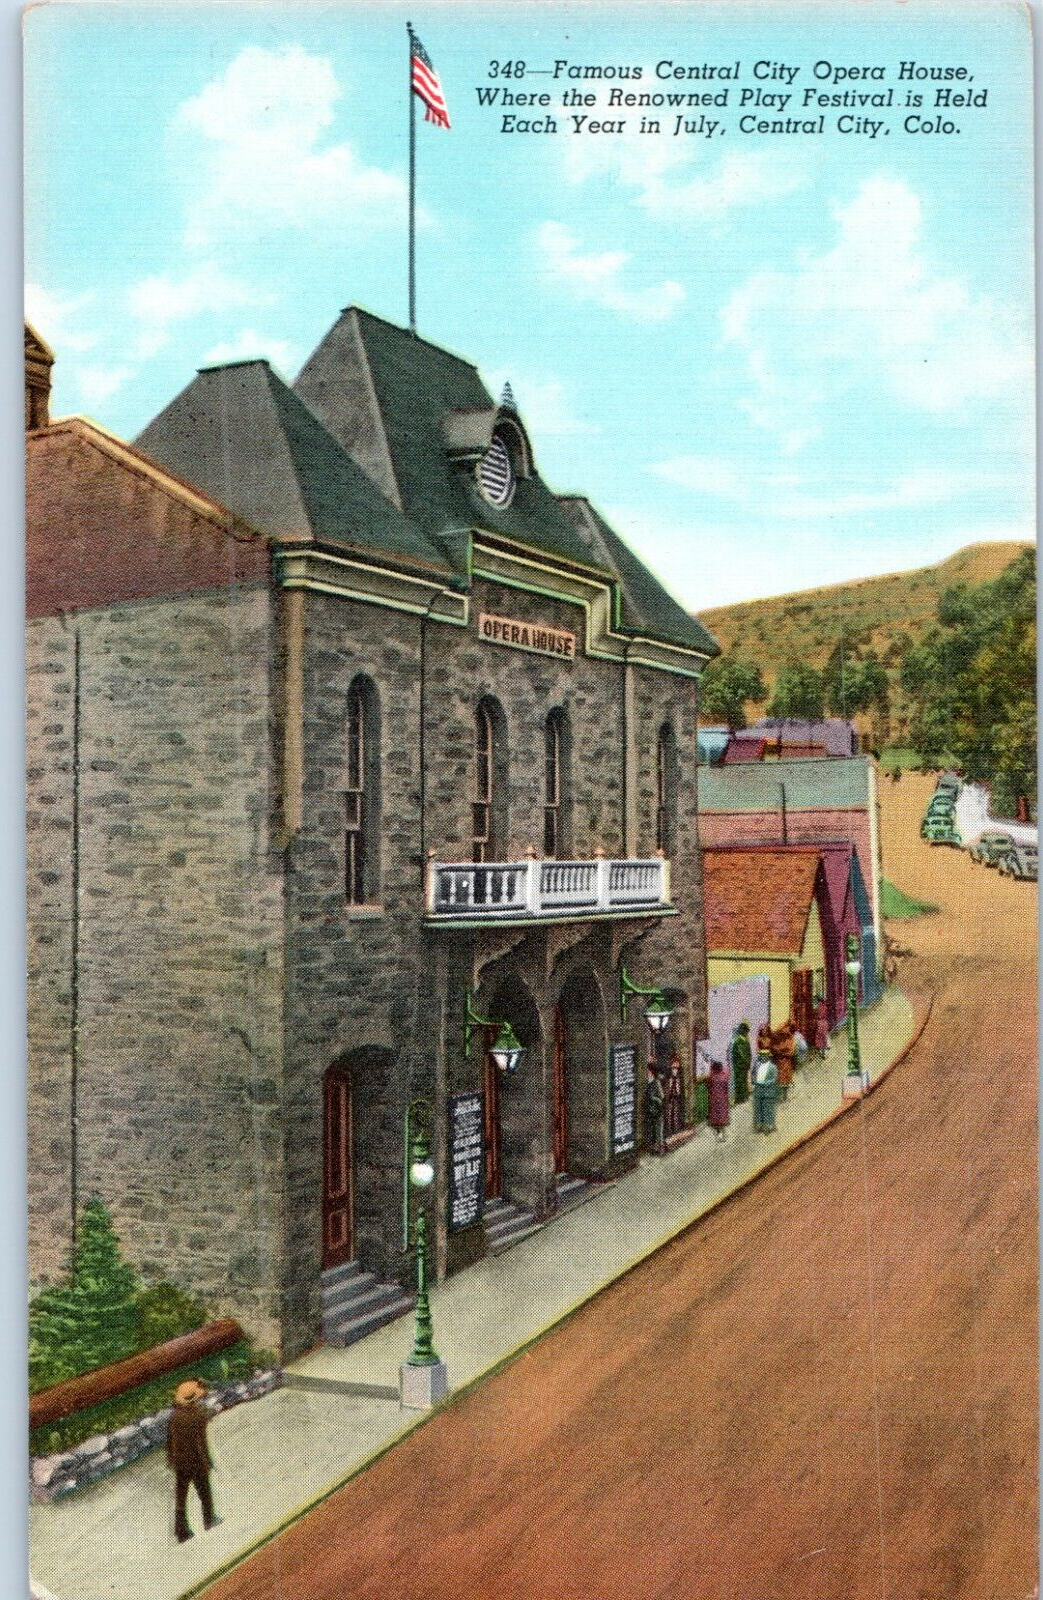 Primary image for Famous Central City Opera House Colorado Postcard